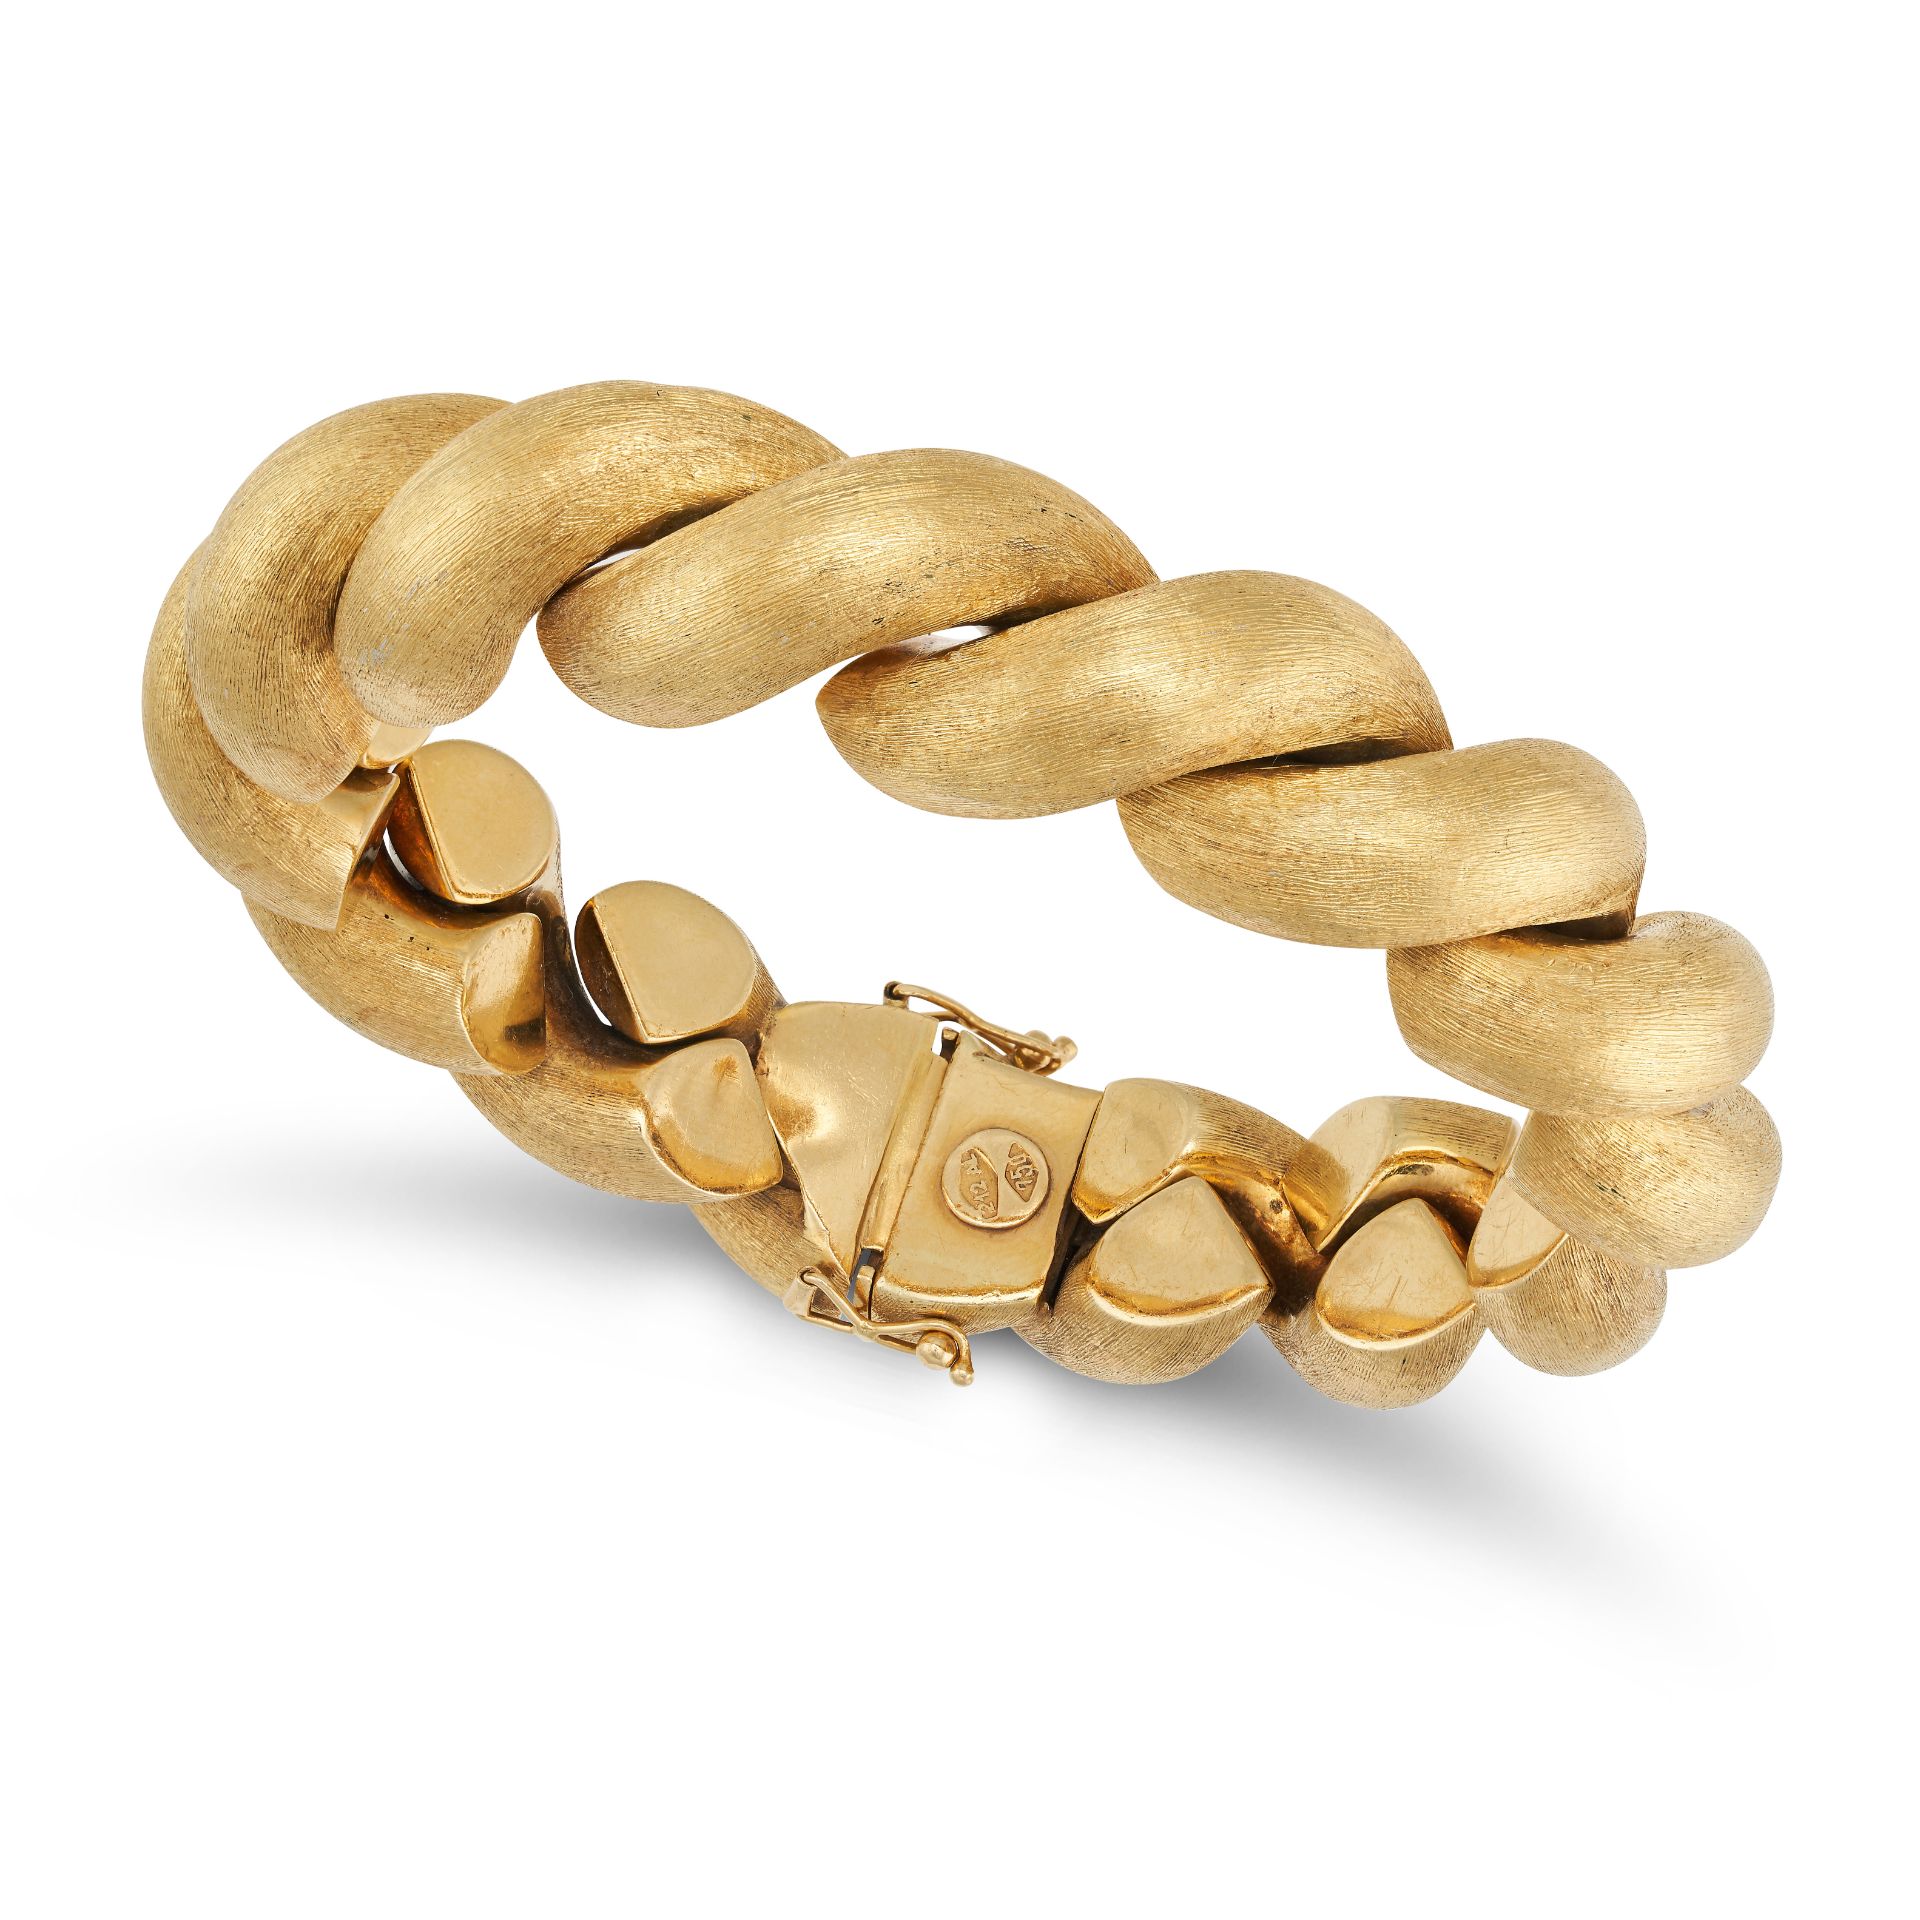 A GOLD BRACELET in 18ct yellow gold, in a textured twisted design, stamped 750, 21.0cm, 98.8g.